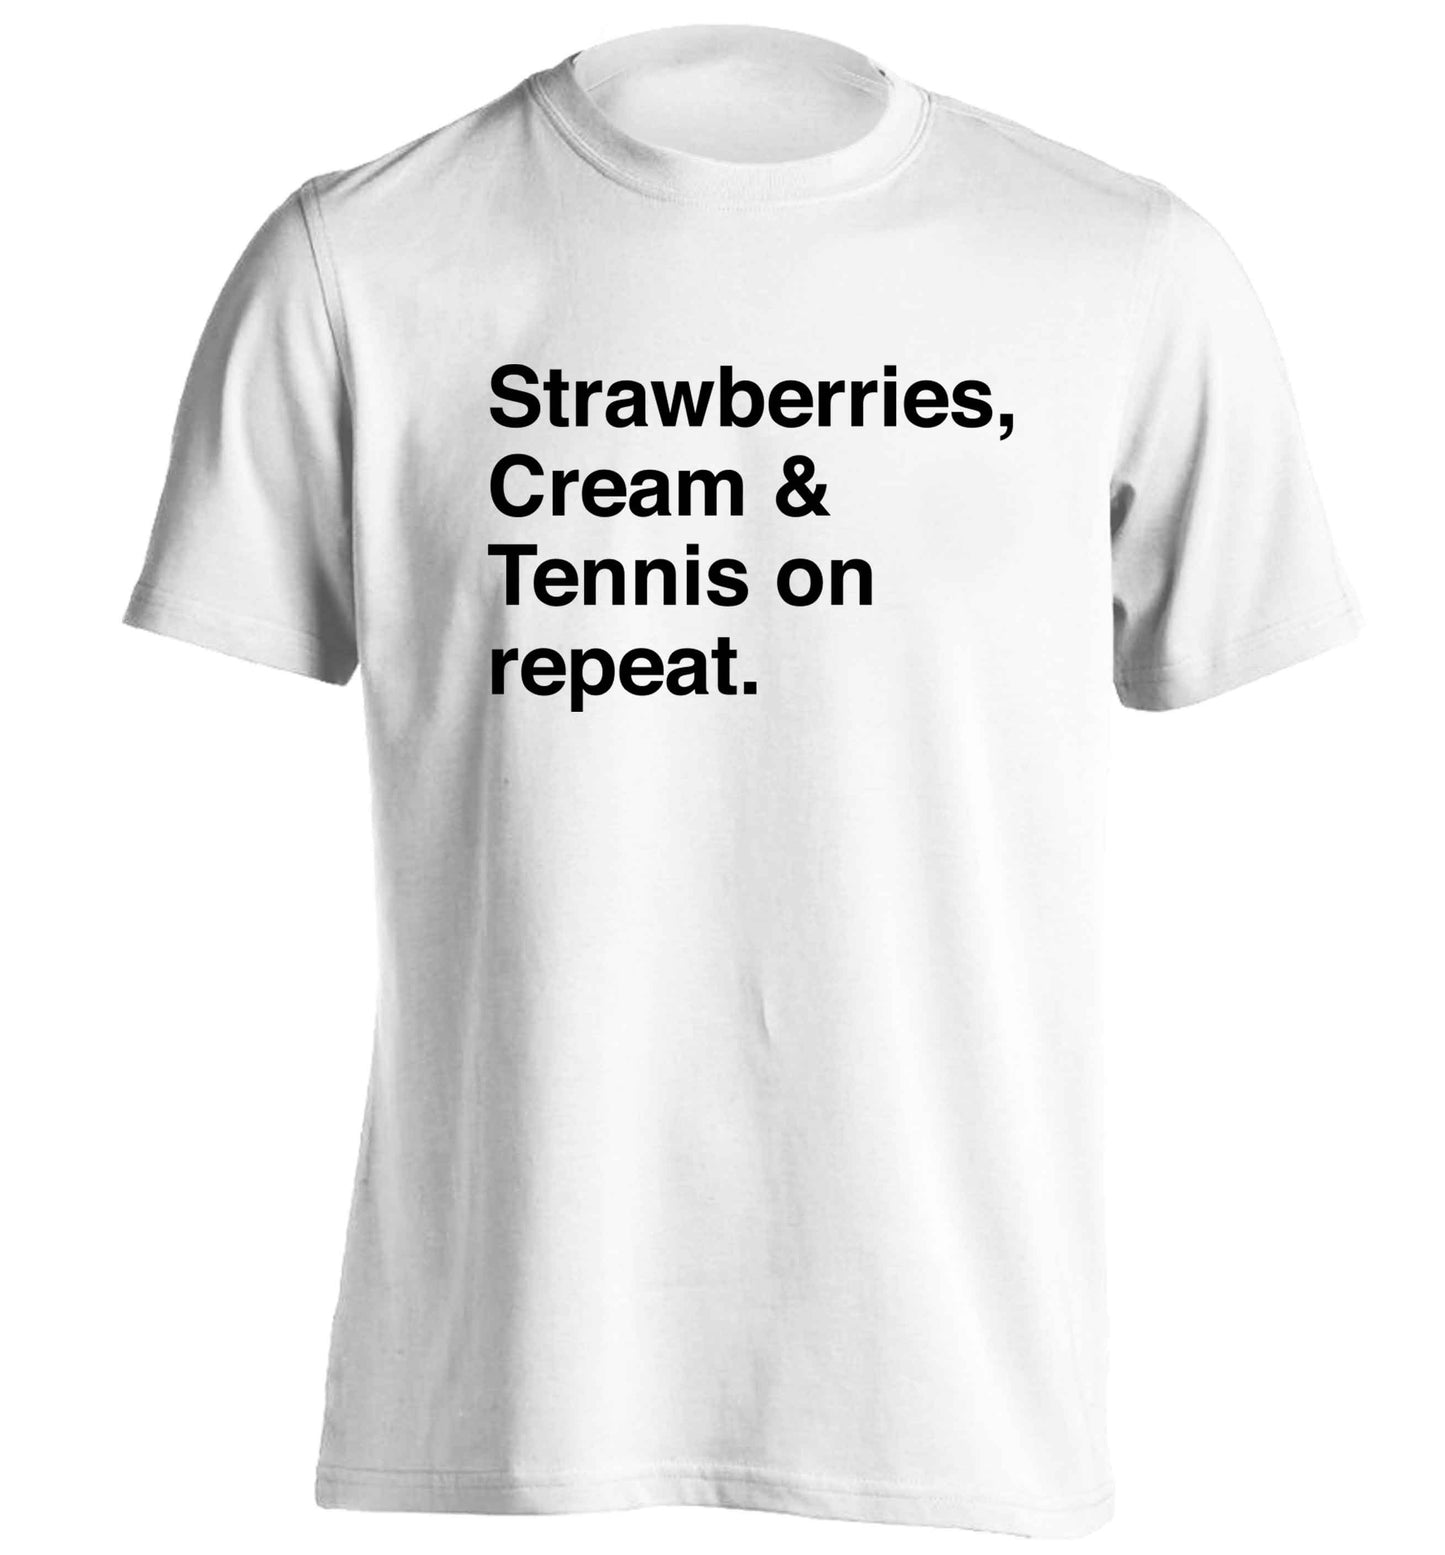 Strawberries, cream and tennis on repeat adults unisex white Tshirt 2XL